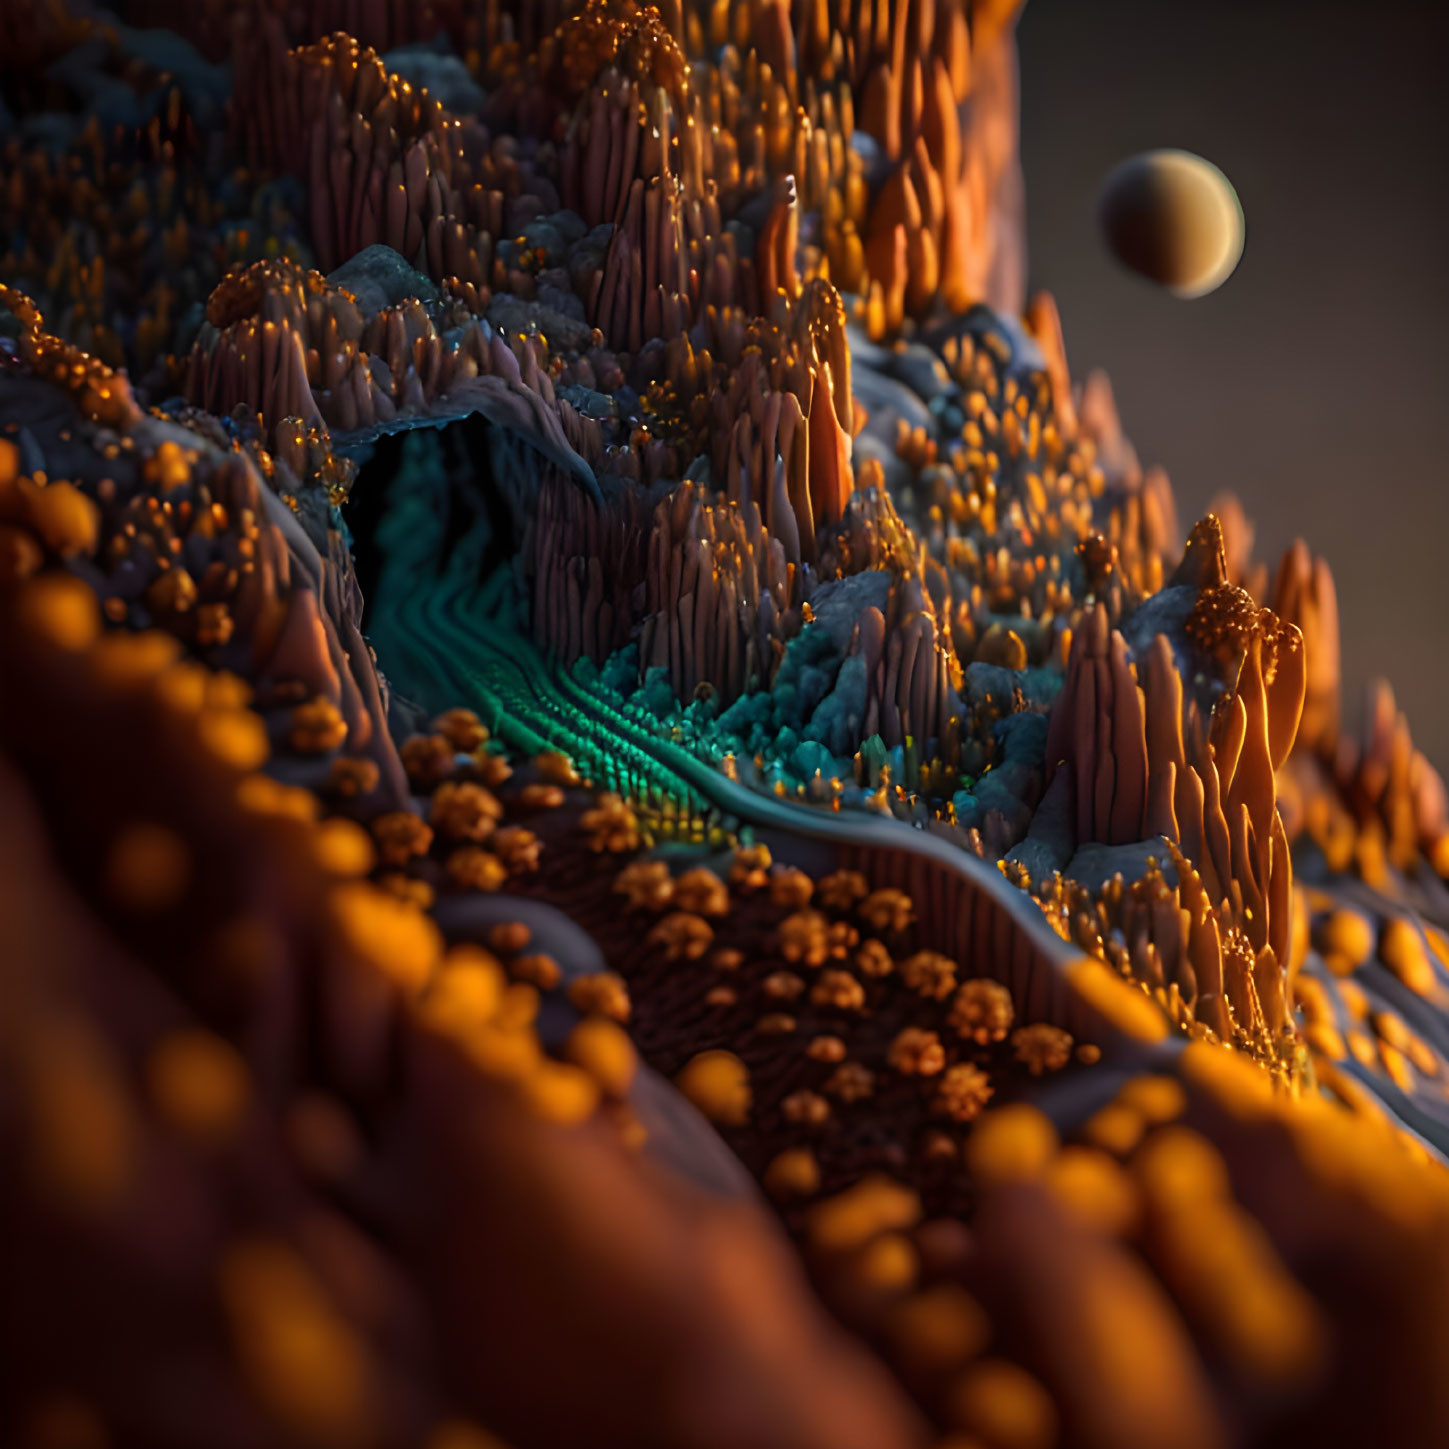 Surreal alien landscape with orange coral structures and teal river